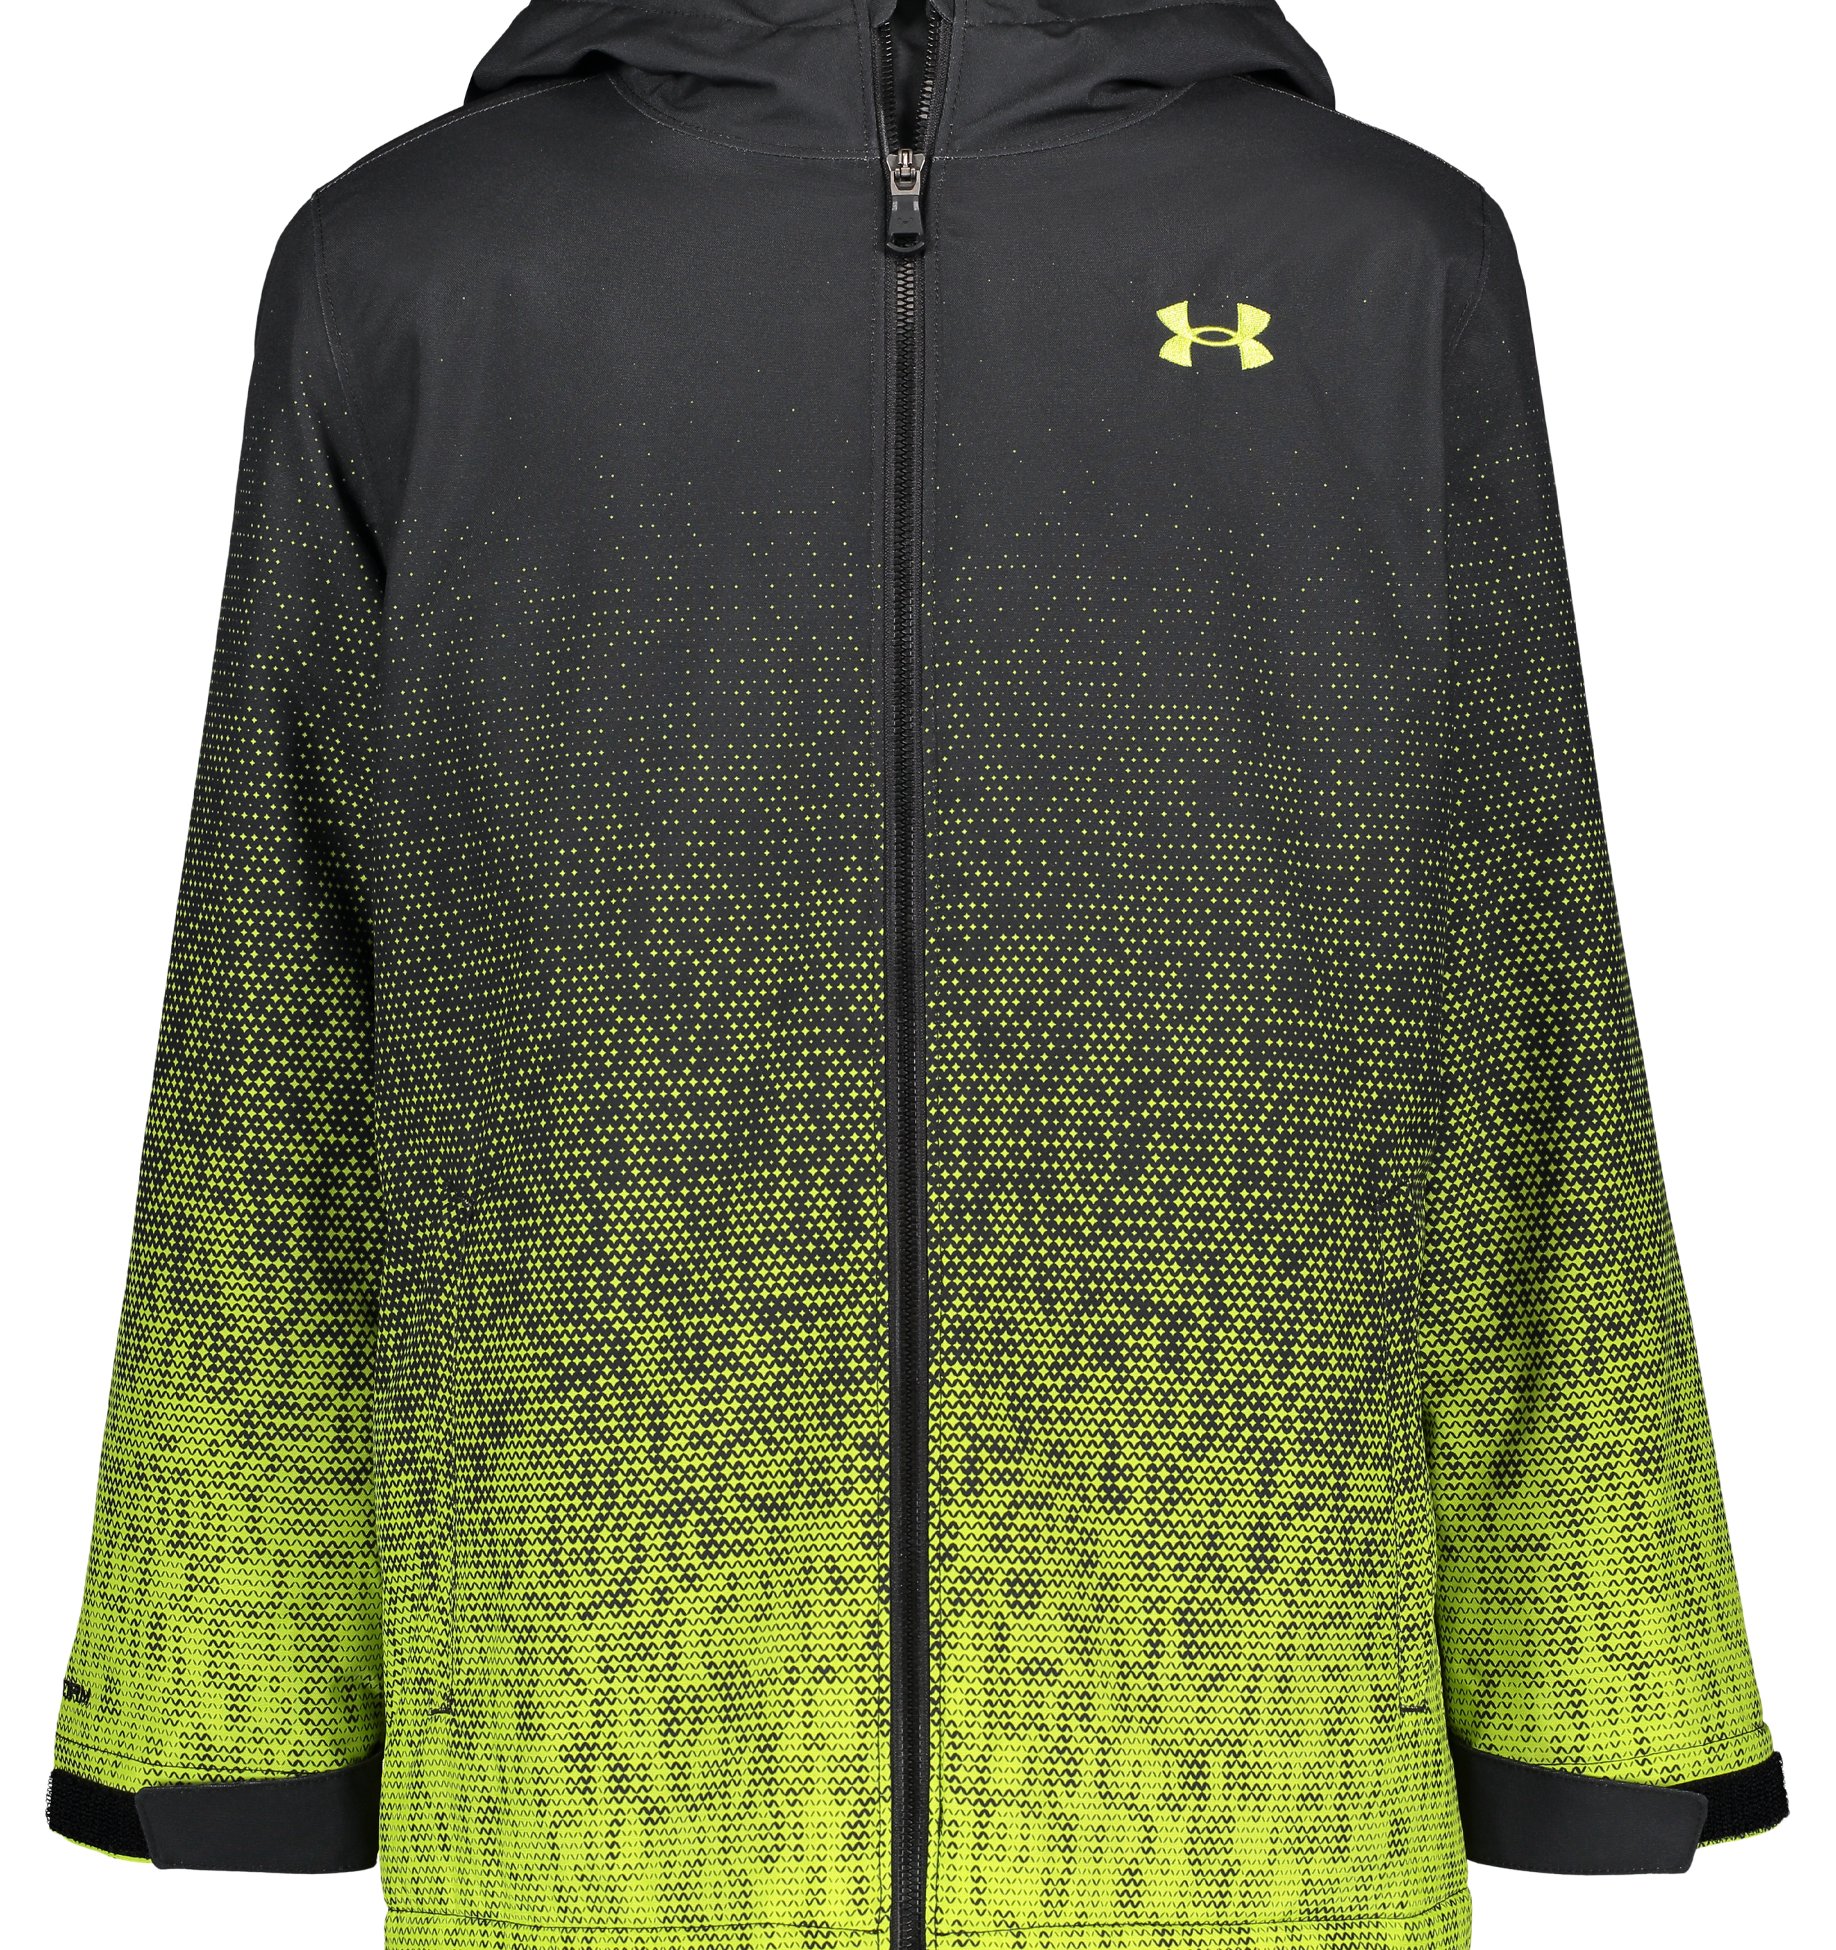 L Details about   NWT Boys Black & Gray Under Armour Jacket 